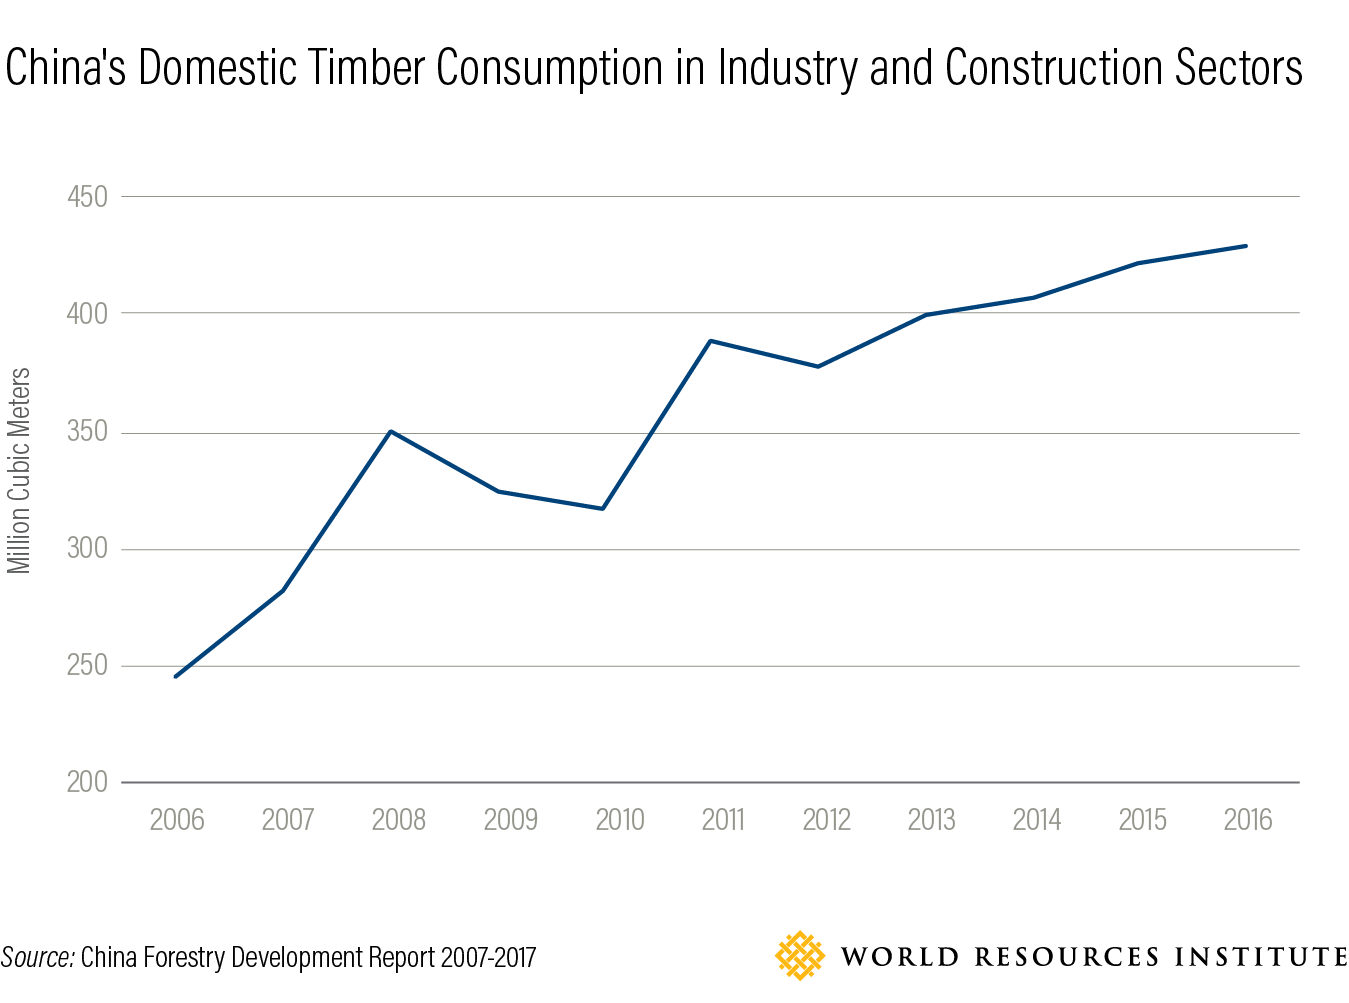 China's Domestic Timber Consumption in Industry and Construction Sectors 